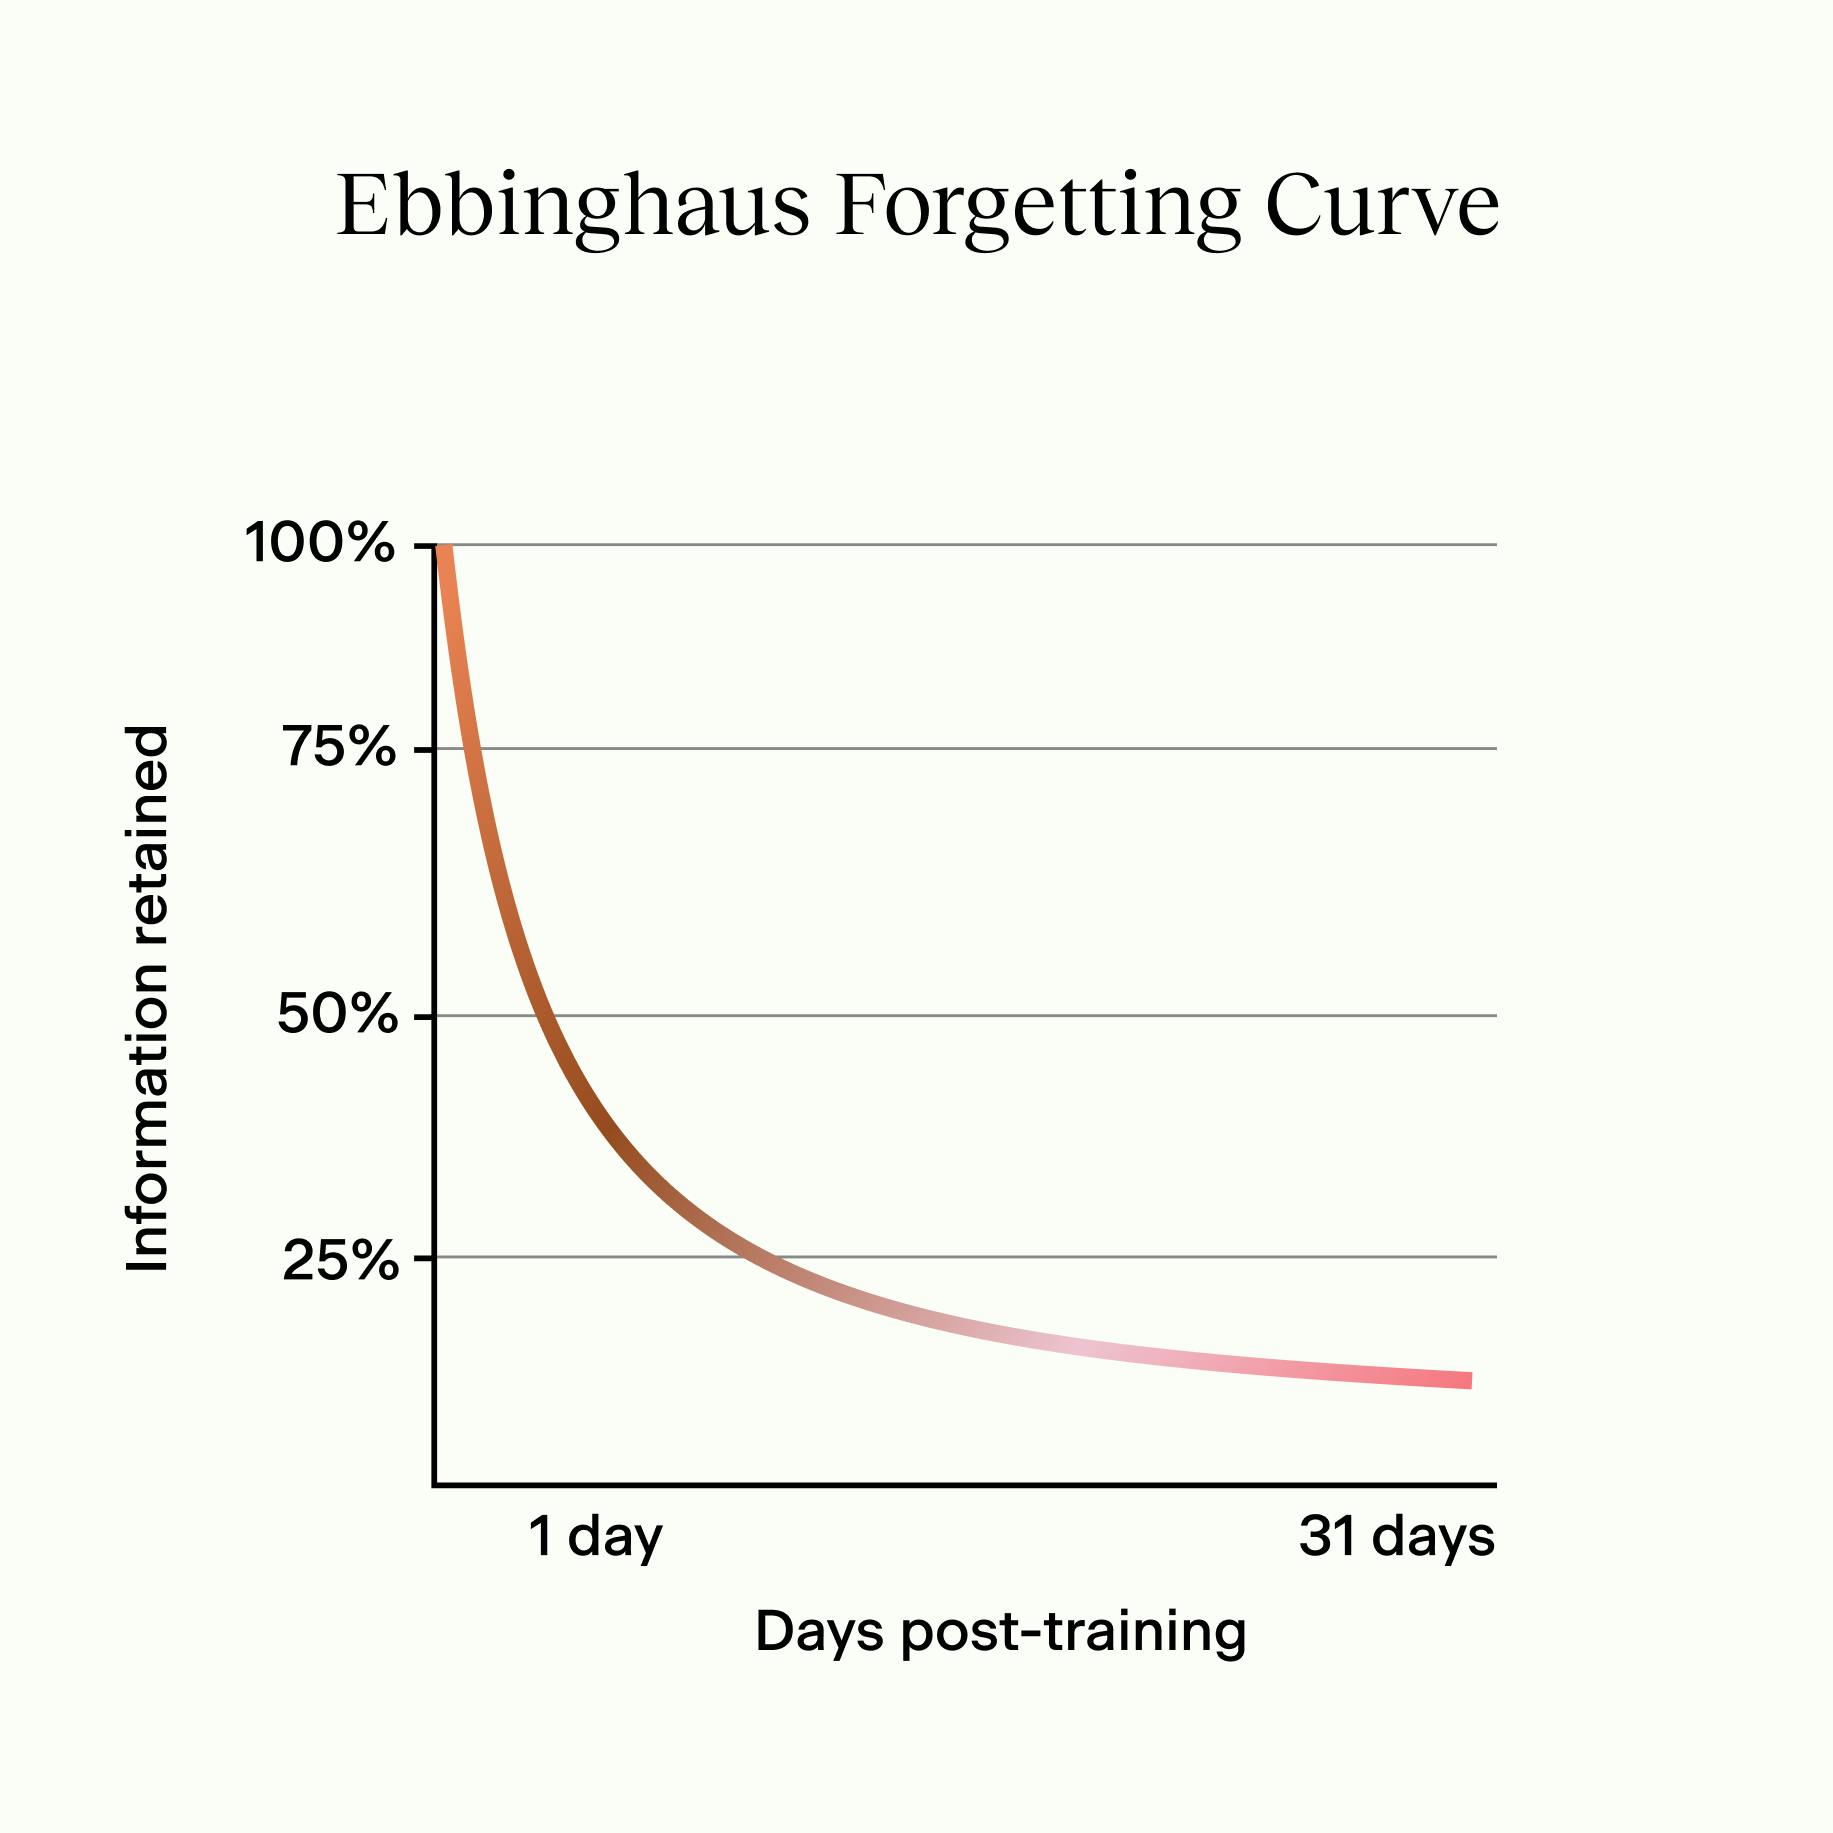 Combat the Ebbinghaus Forgetting Curve